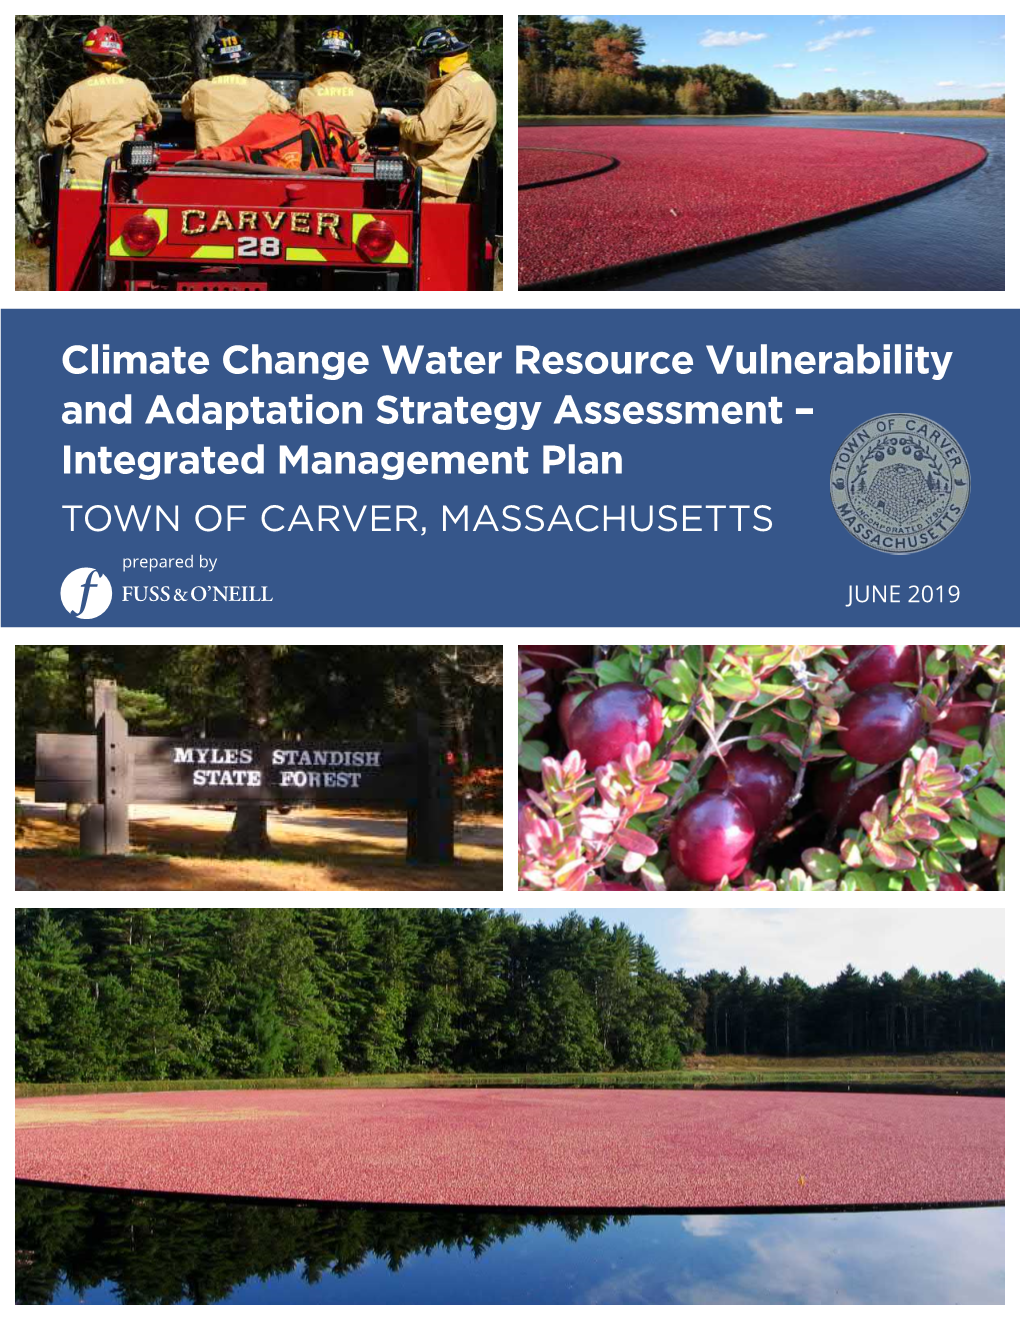 Climate Change Water Resource Vulnerability and Adaptation Strategy Assessment – Integrated Management Plan TOWN of CARVER, MASSACHUSETTS